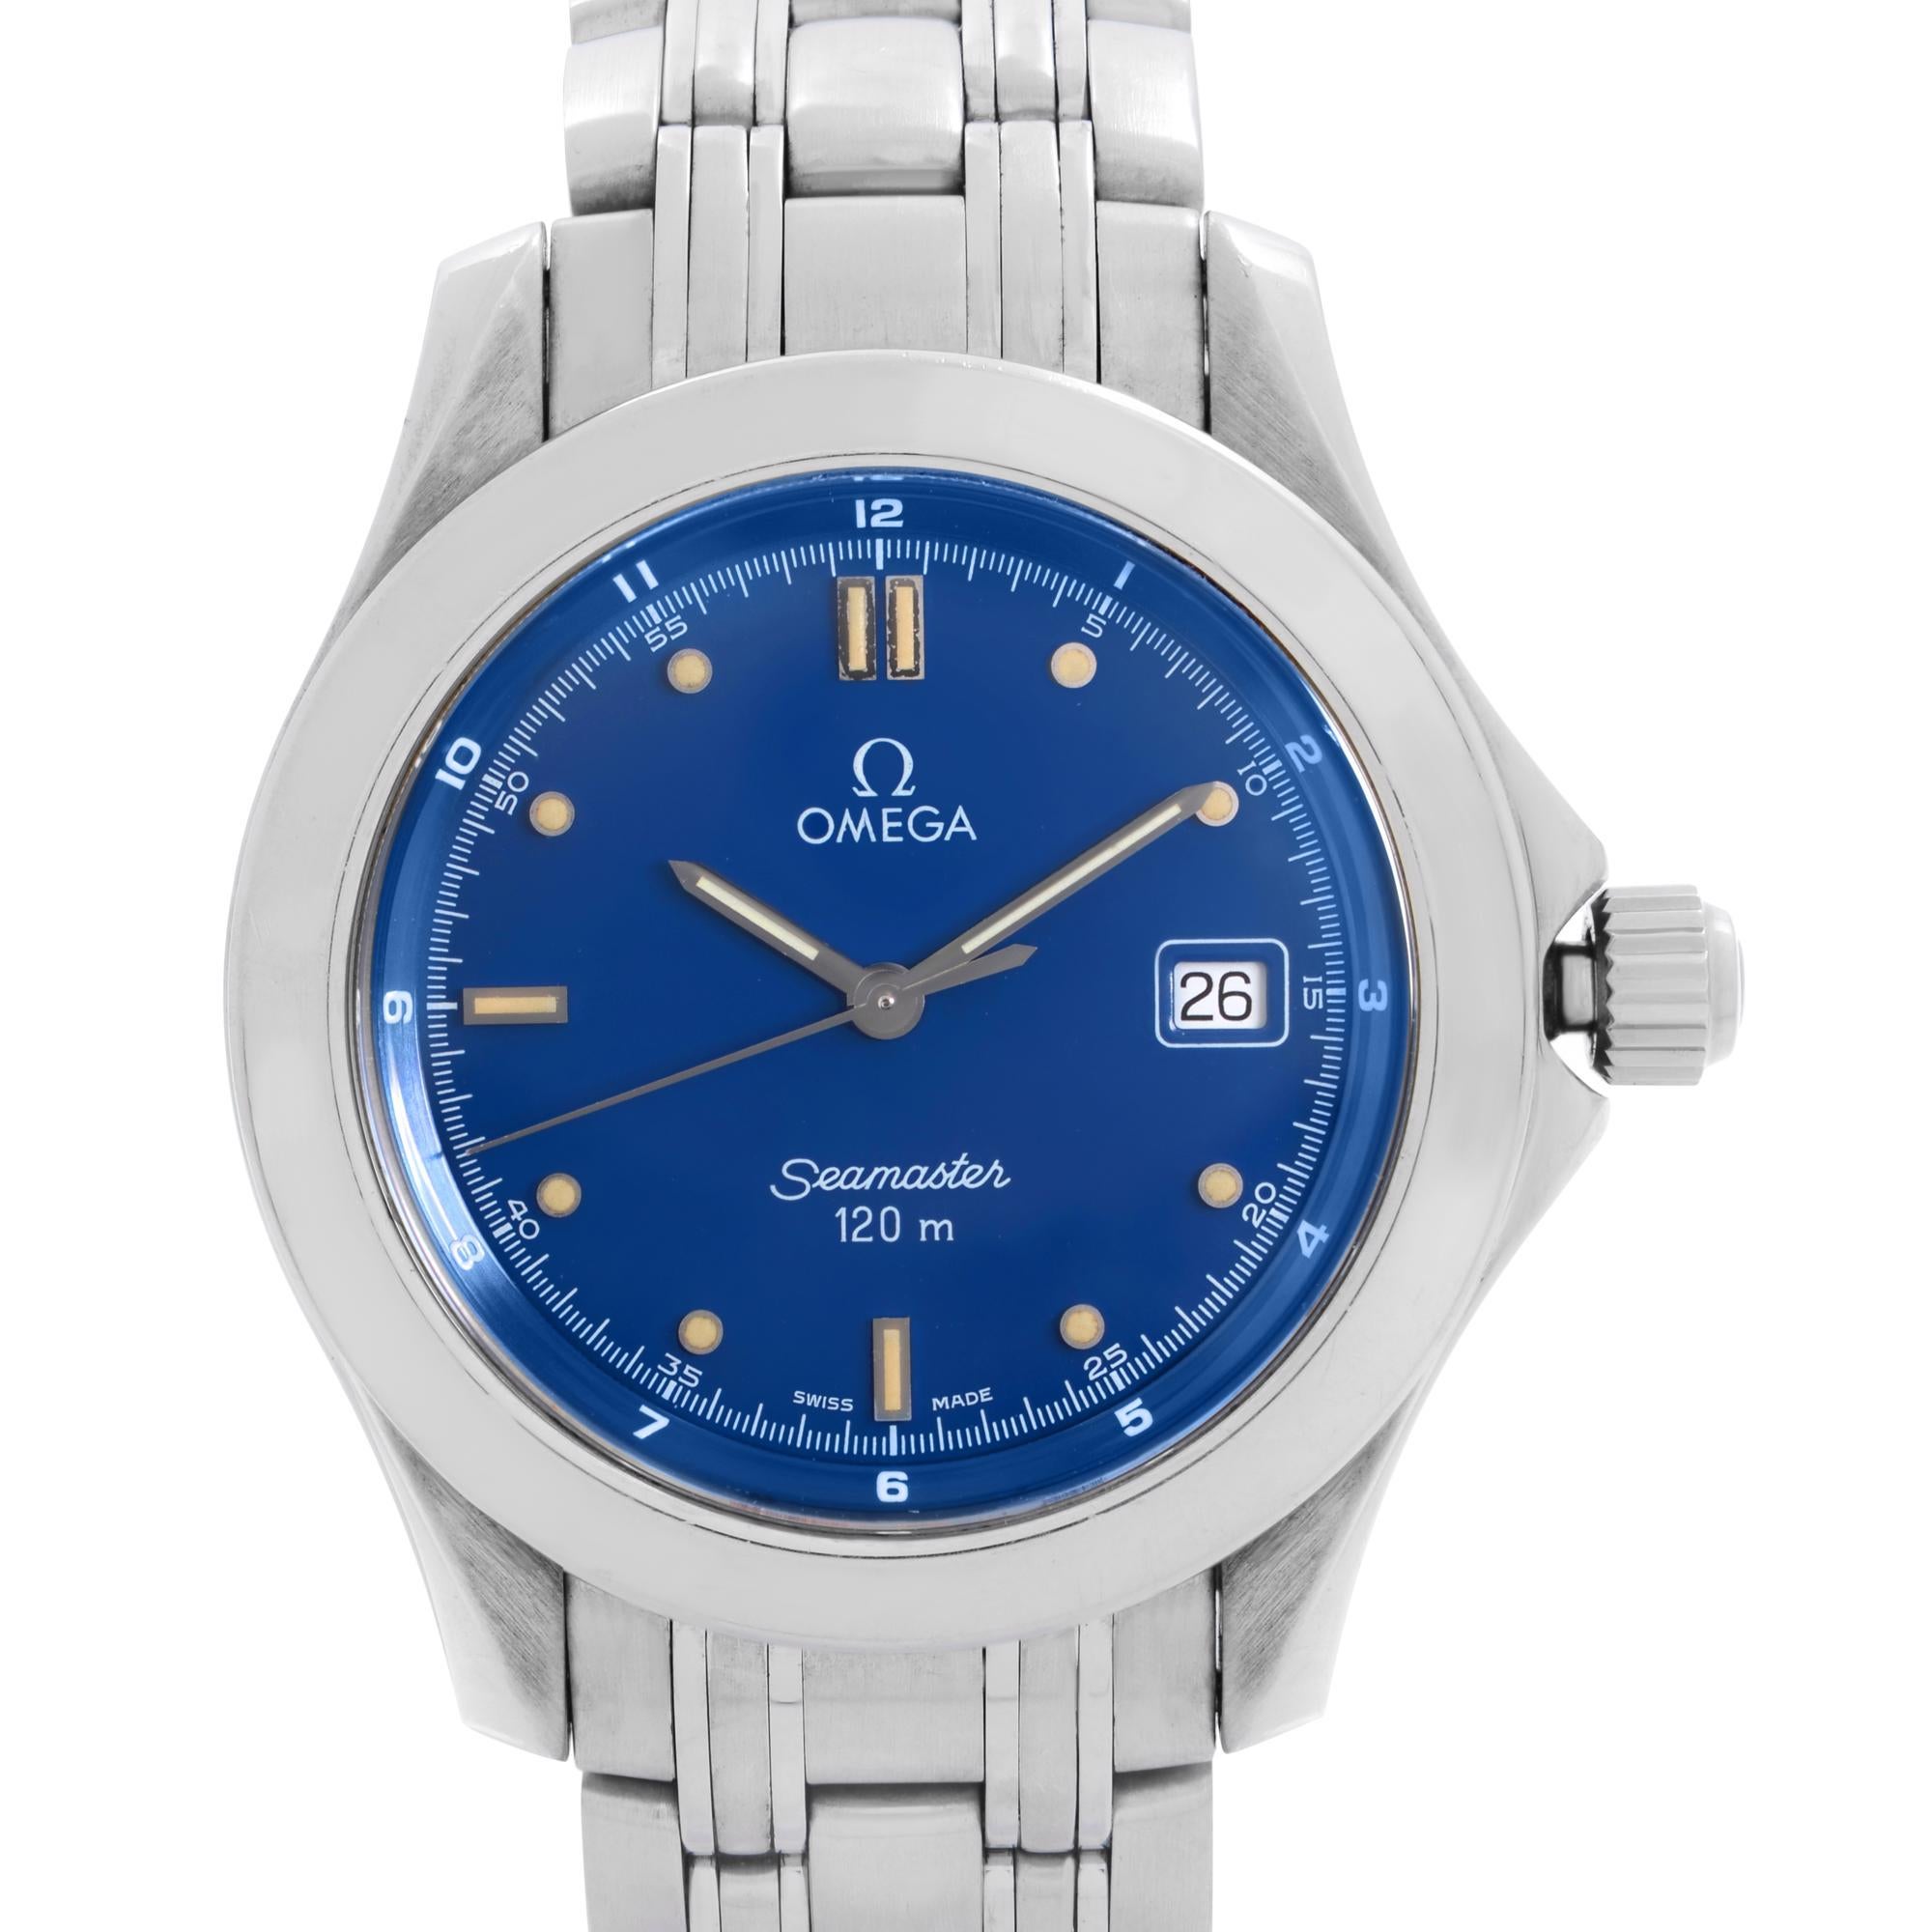 Pre-owned Vintage Omega Seamaster 120 36mm Steel Blue Dial Men's Quartz Watch 2511.80.00. Flat The Watch Shows Signs Wear. This Beautiful Timepiece is Powered by a Quartz (Battery) Movement and Features: Stainless Steel Case & Bracelet, Fixed